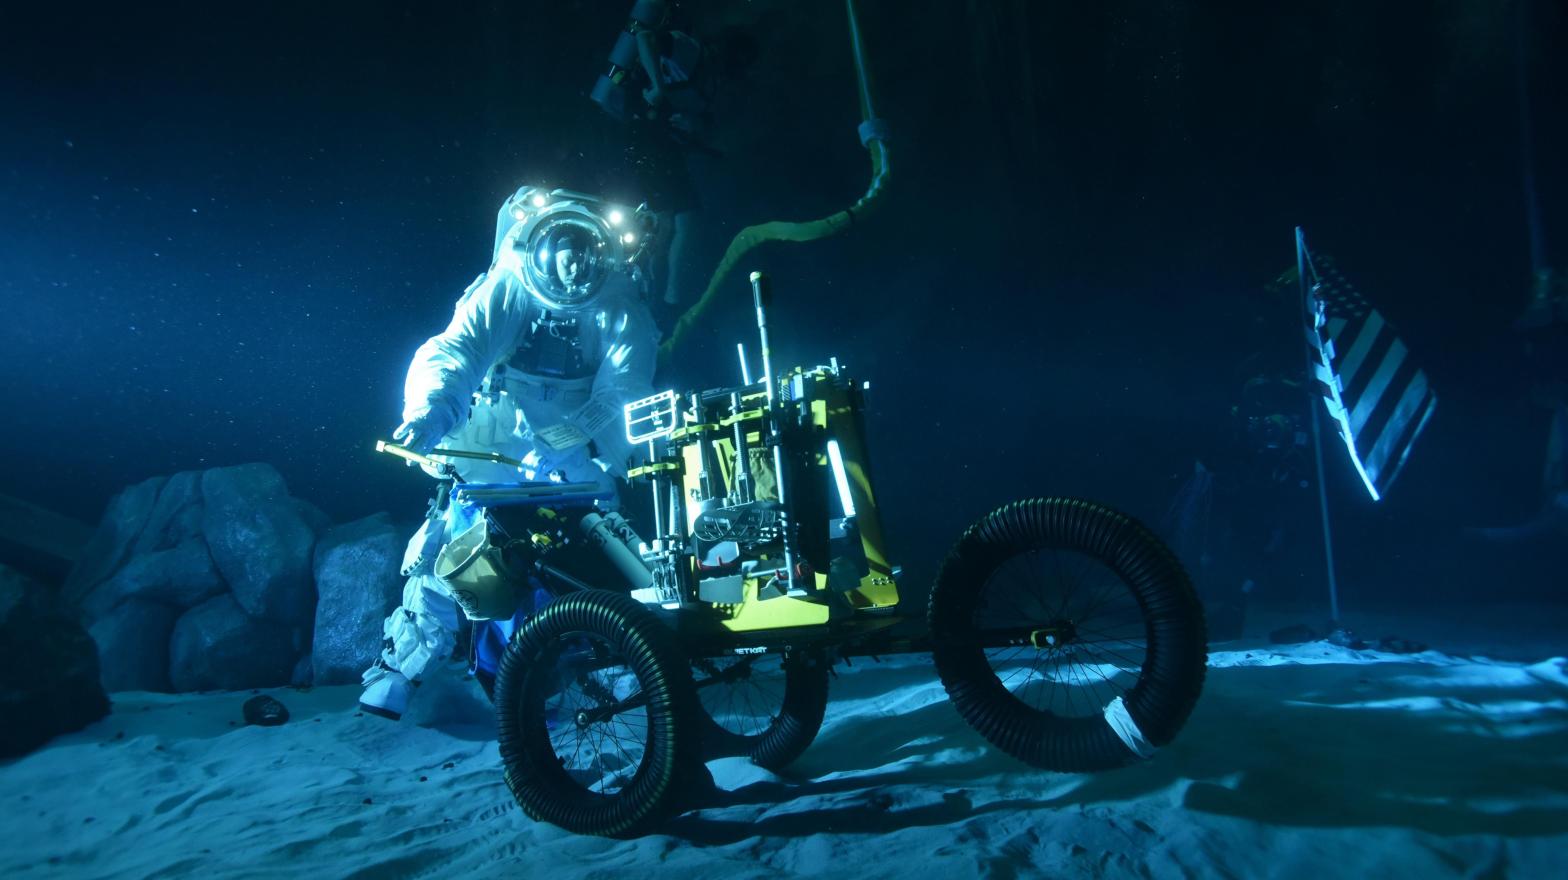 Test divers practiced tasks in the pool with low lighting to simulate lunar conditions. (Photo: NASA)